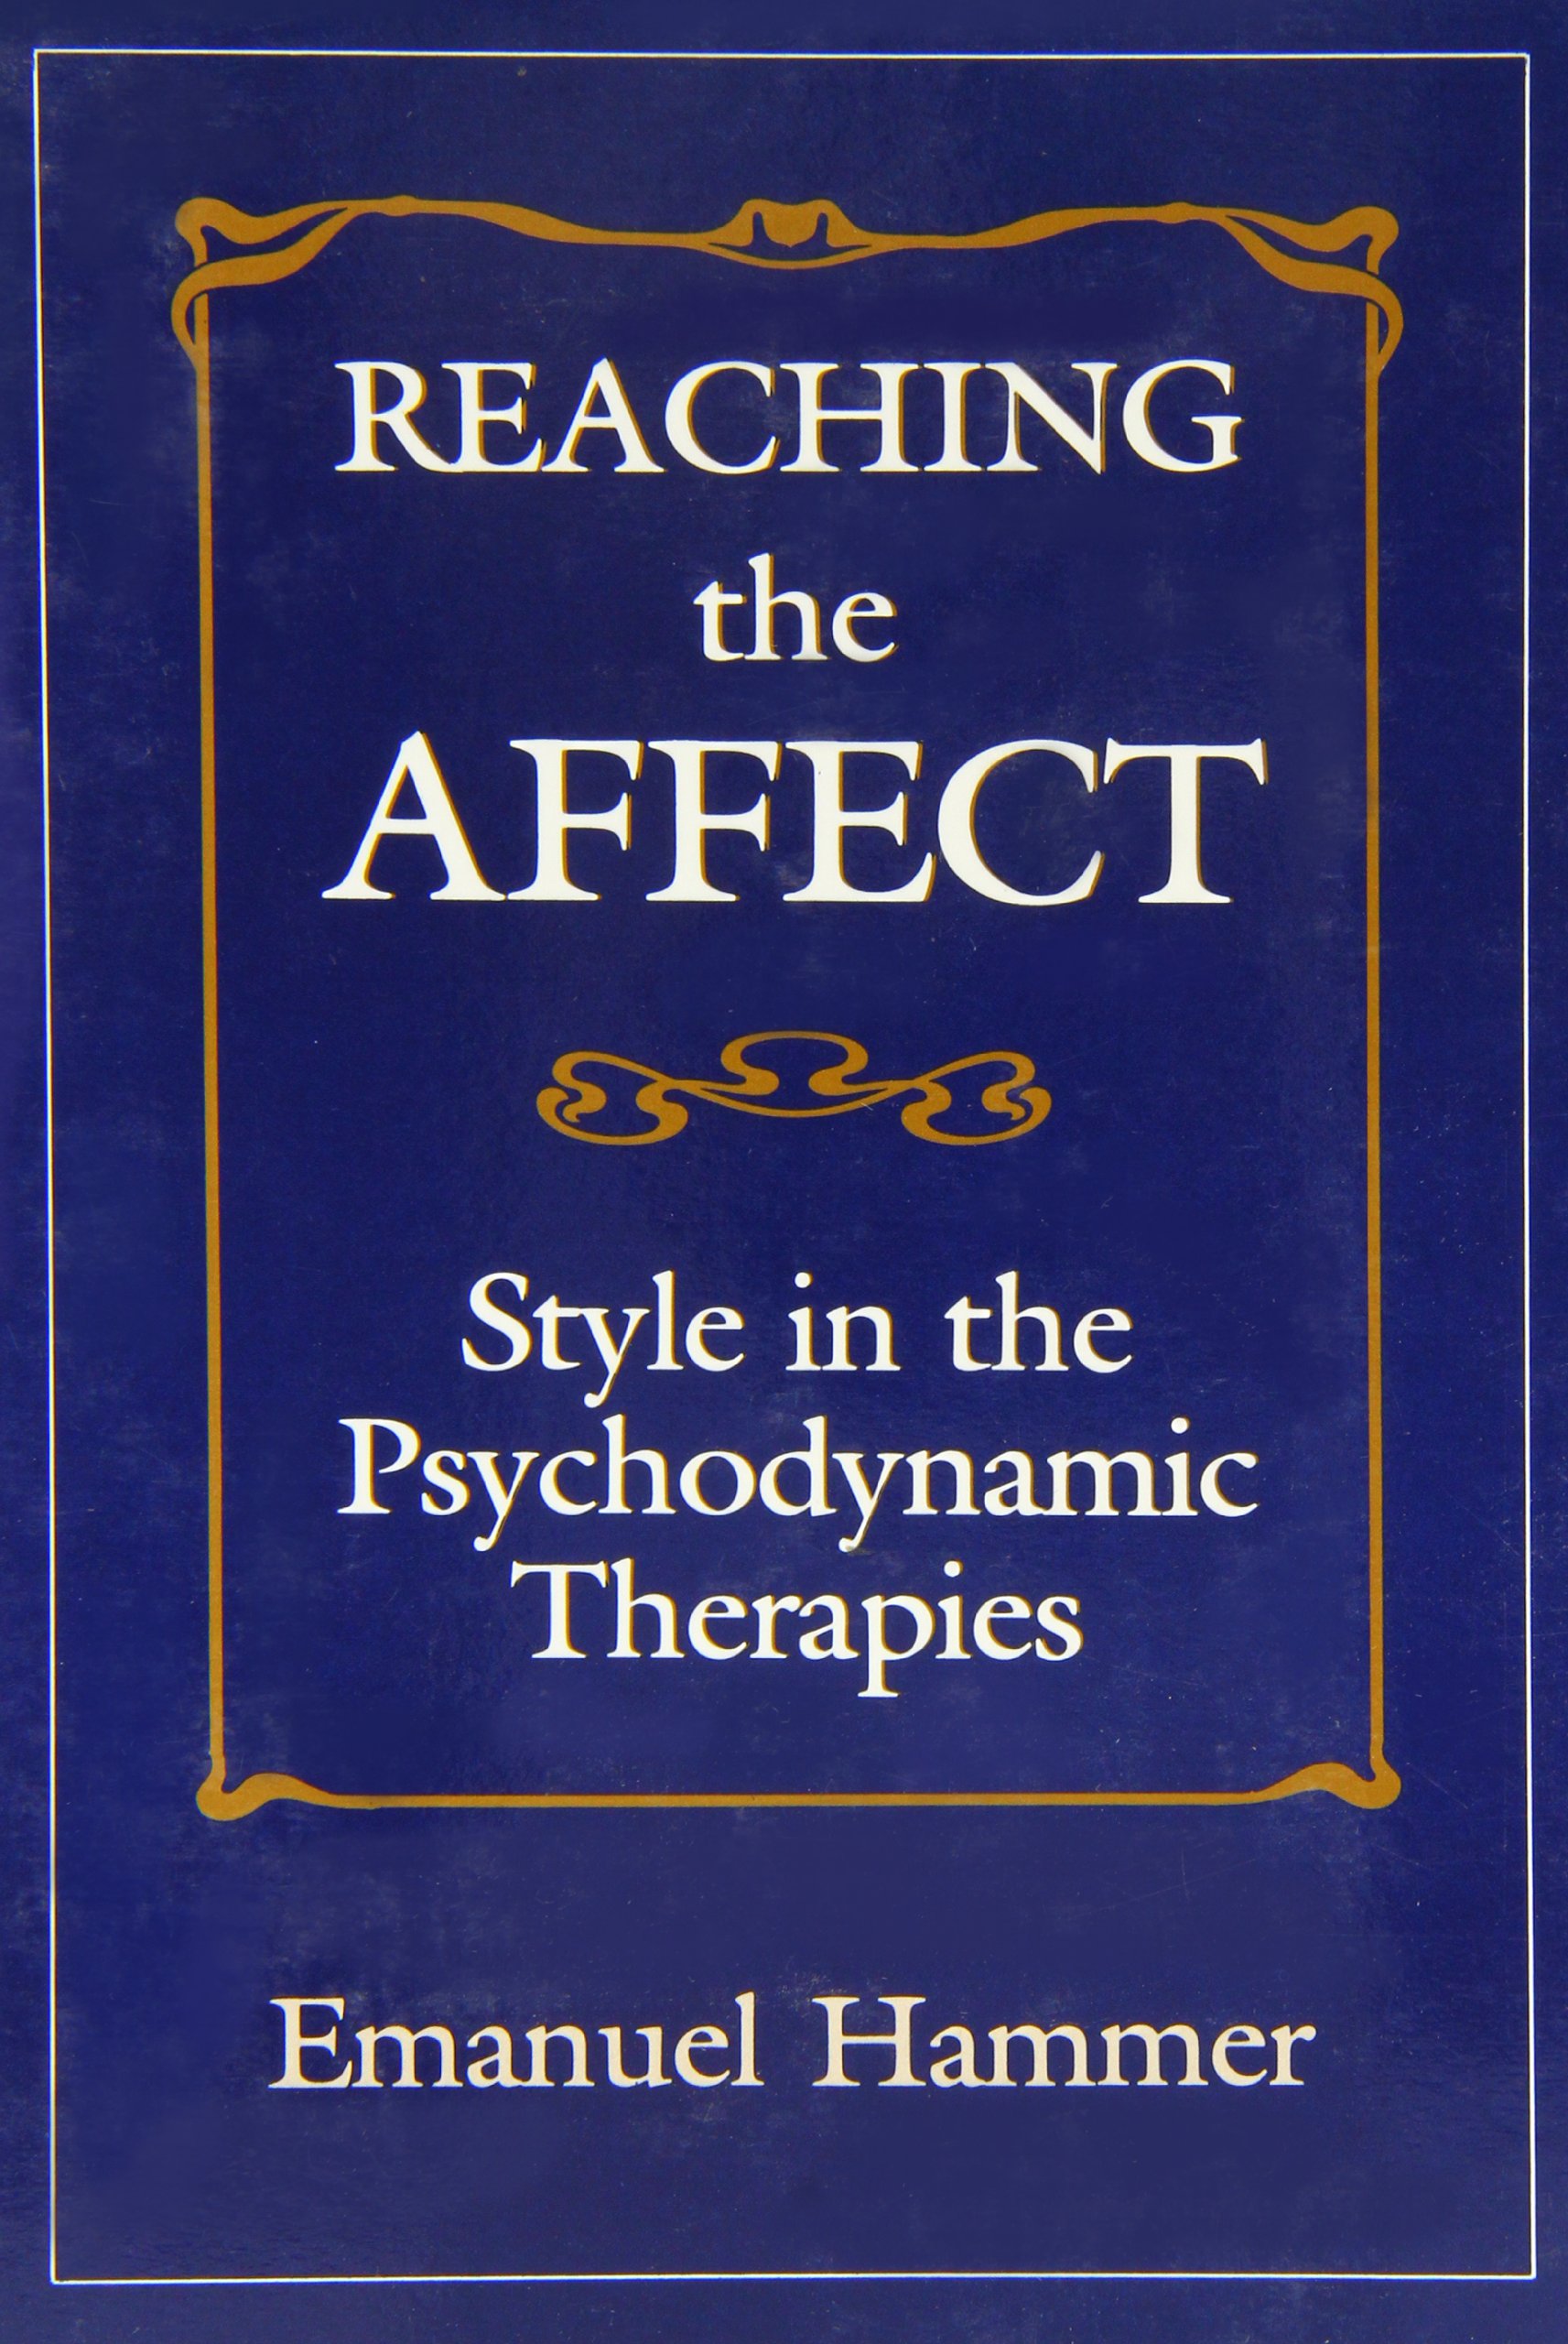 Reaching the Affect: Style in the Psychodynamic Therapies: